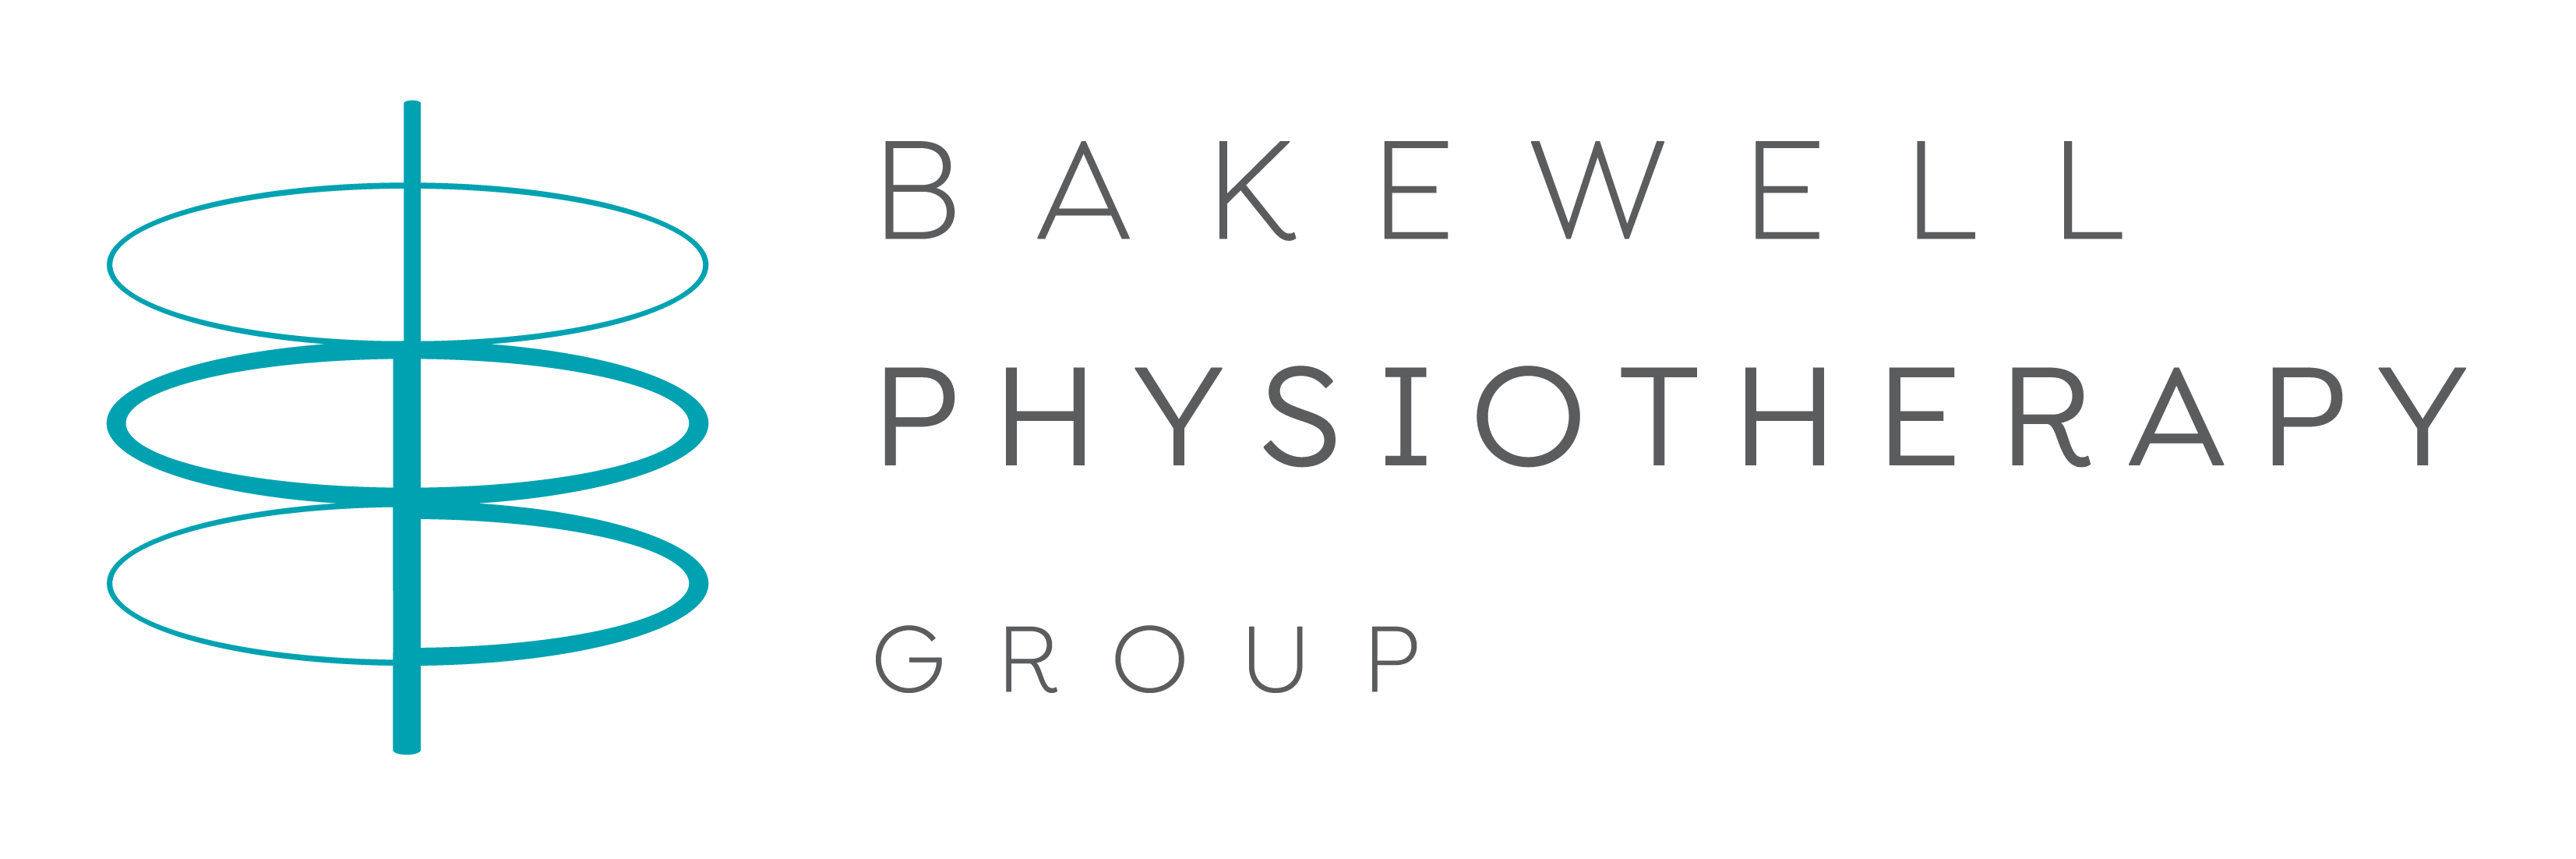 Bakewell Physiotherapy 